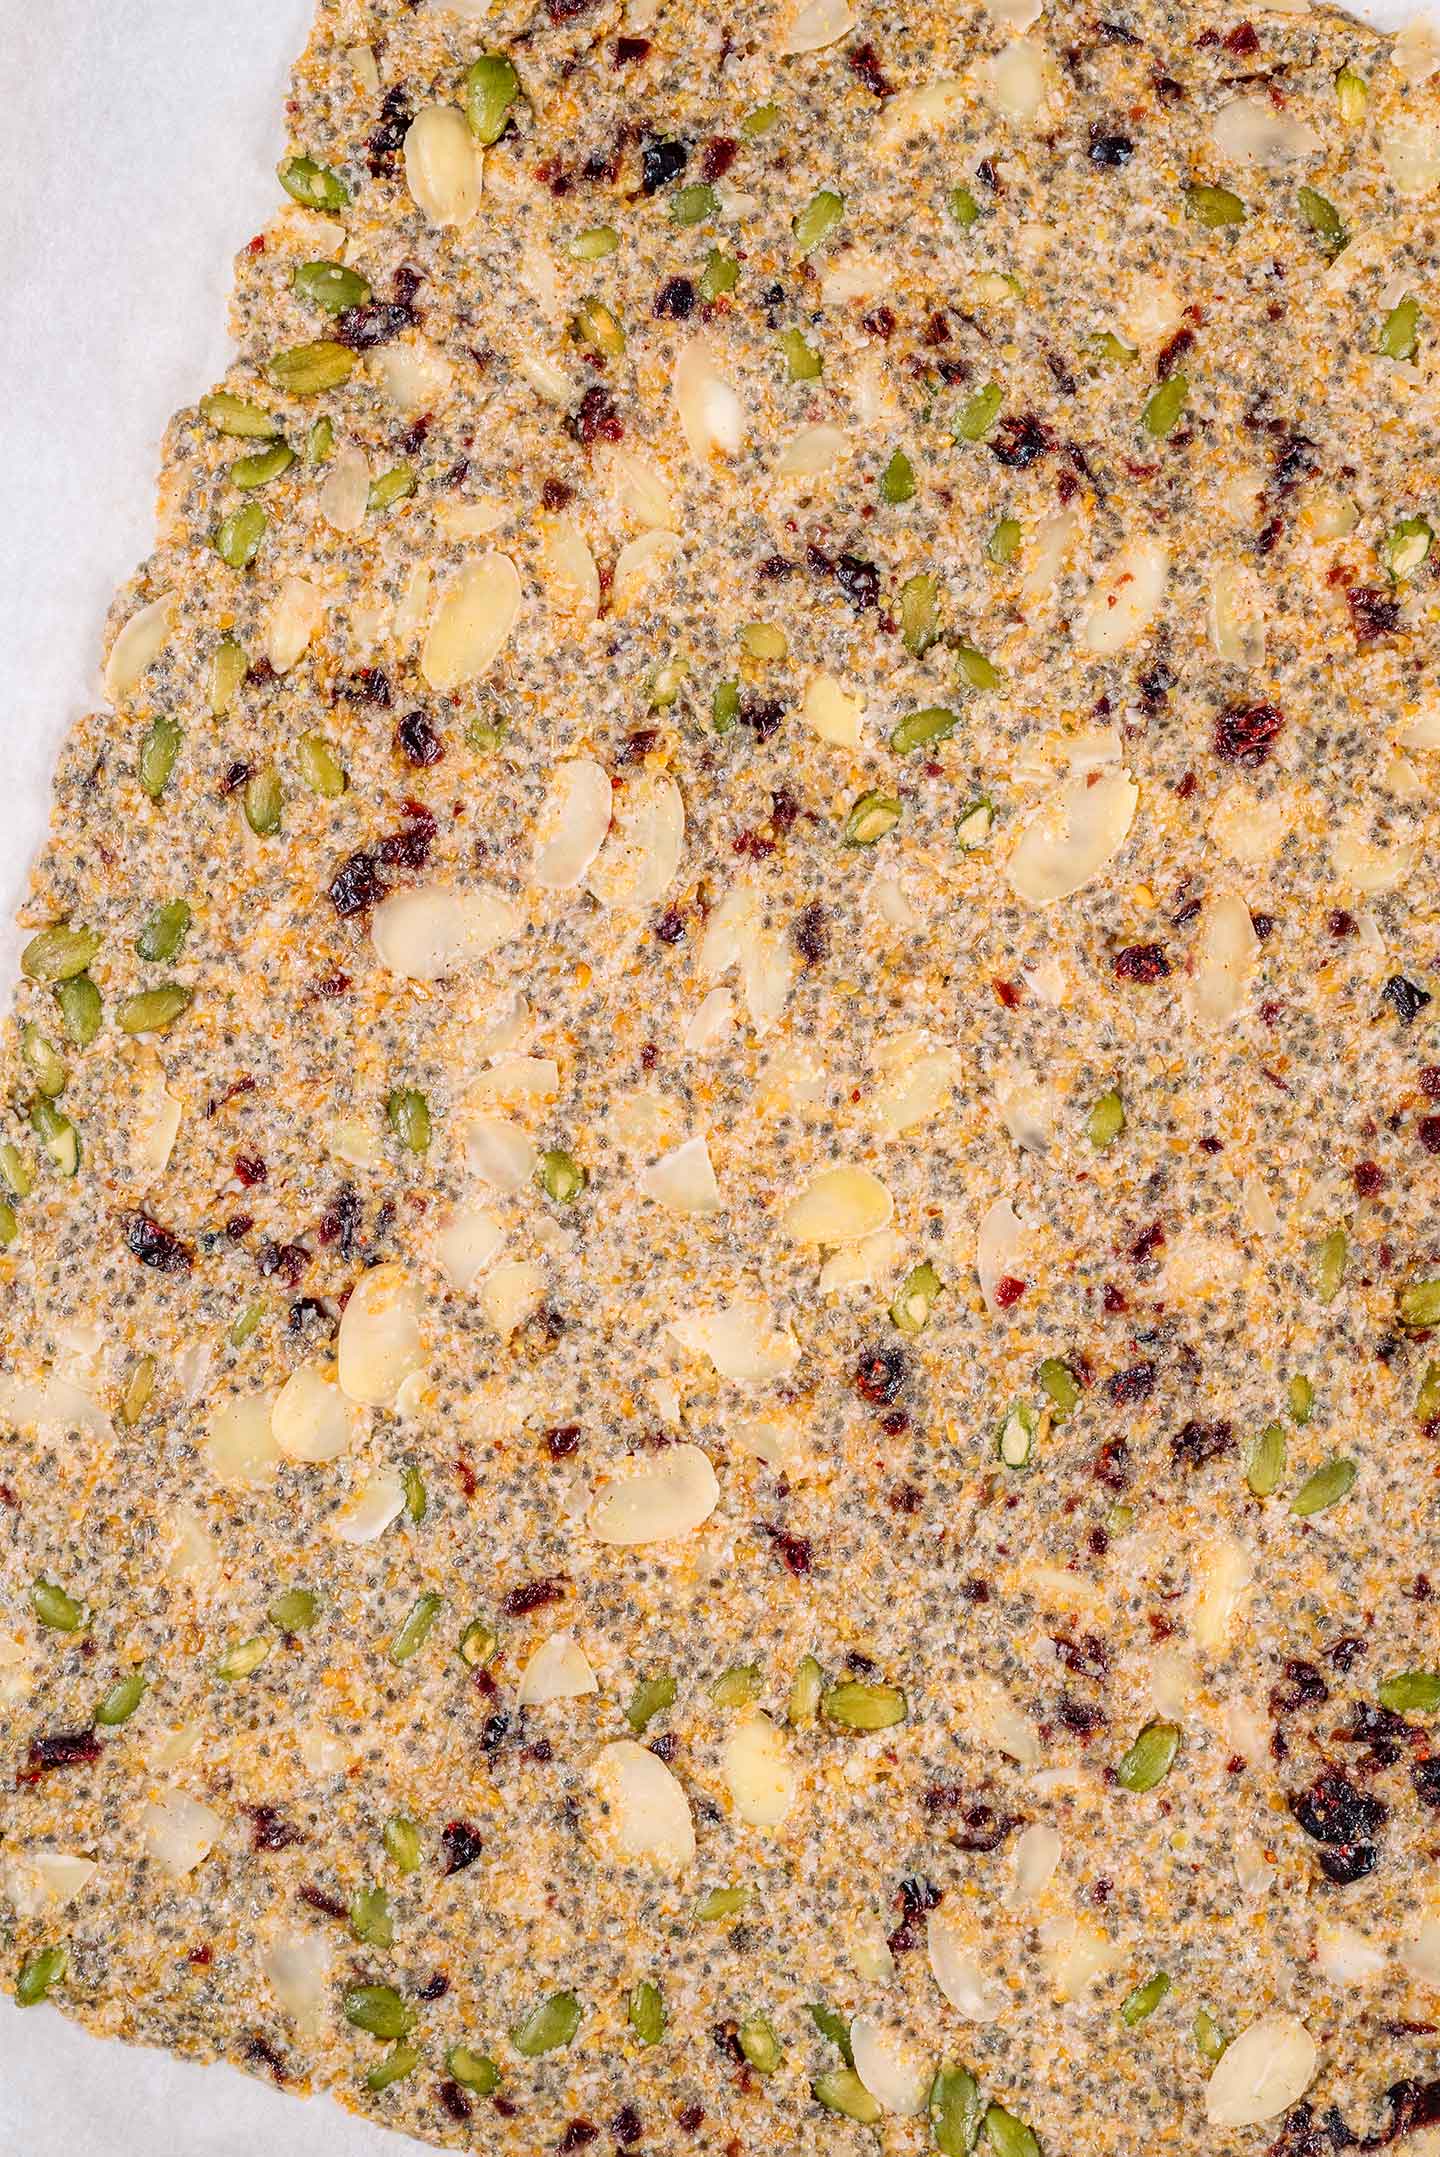 Top down view of the holiday seed cracker mixture spread thinly on a baking sheet lined with parchment paper.